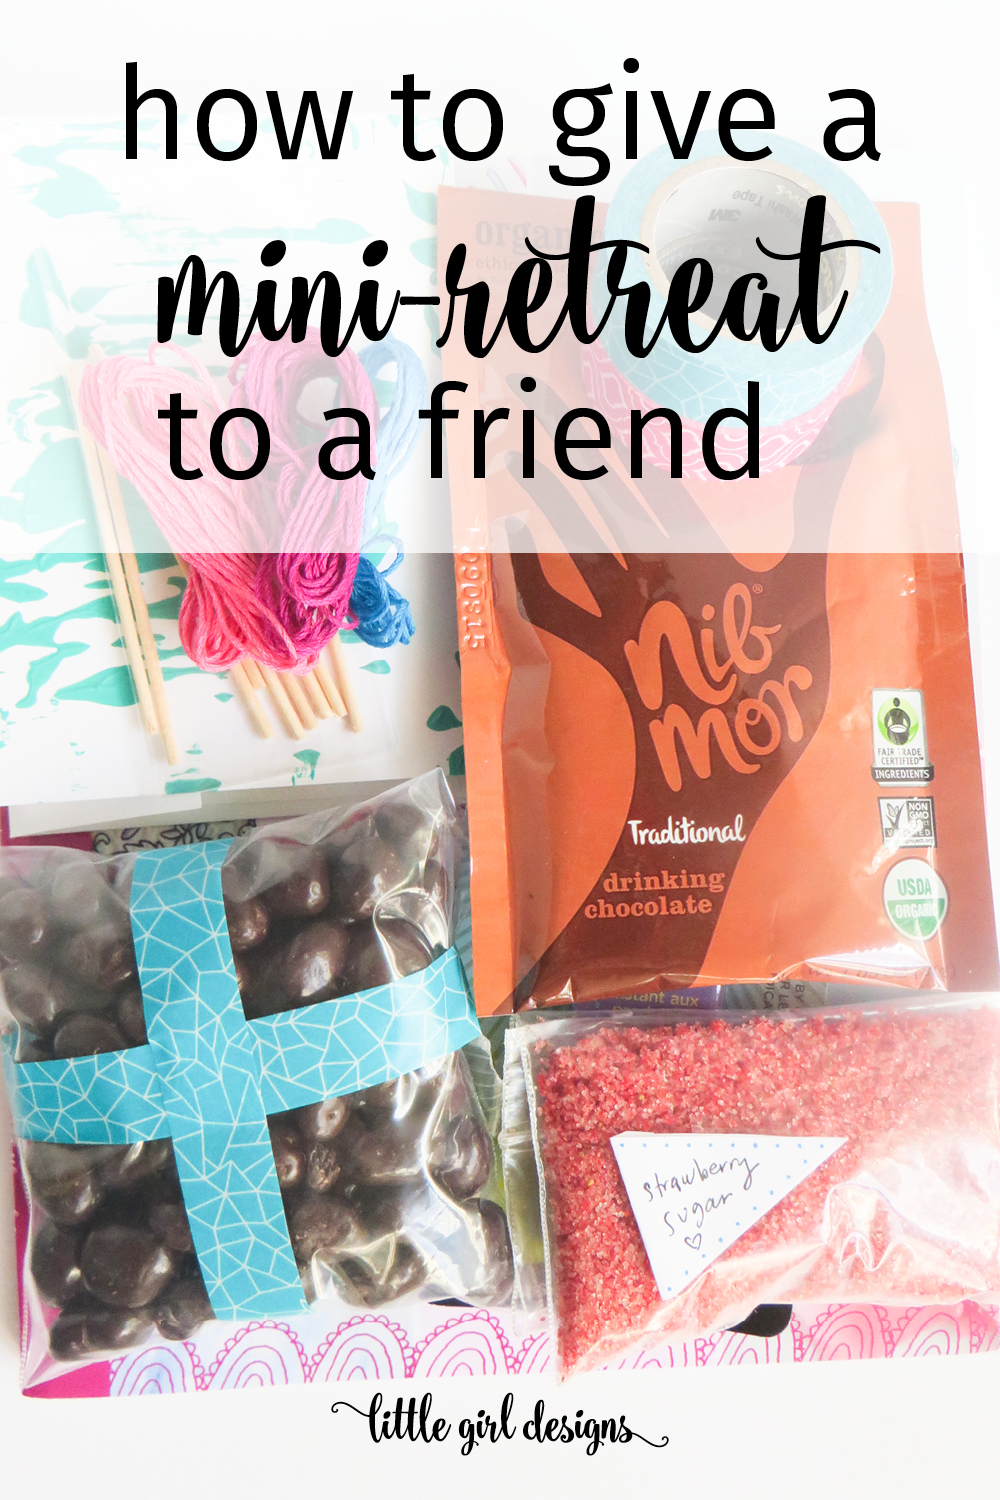 Have a friend who needs a mini-retreat? Here's how you can put together a mini creative retreat for her that she'll love. Makes the perfect best friend gift! :)